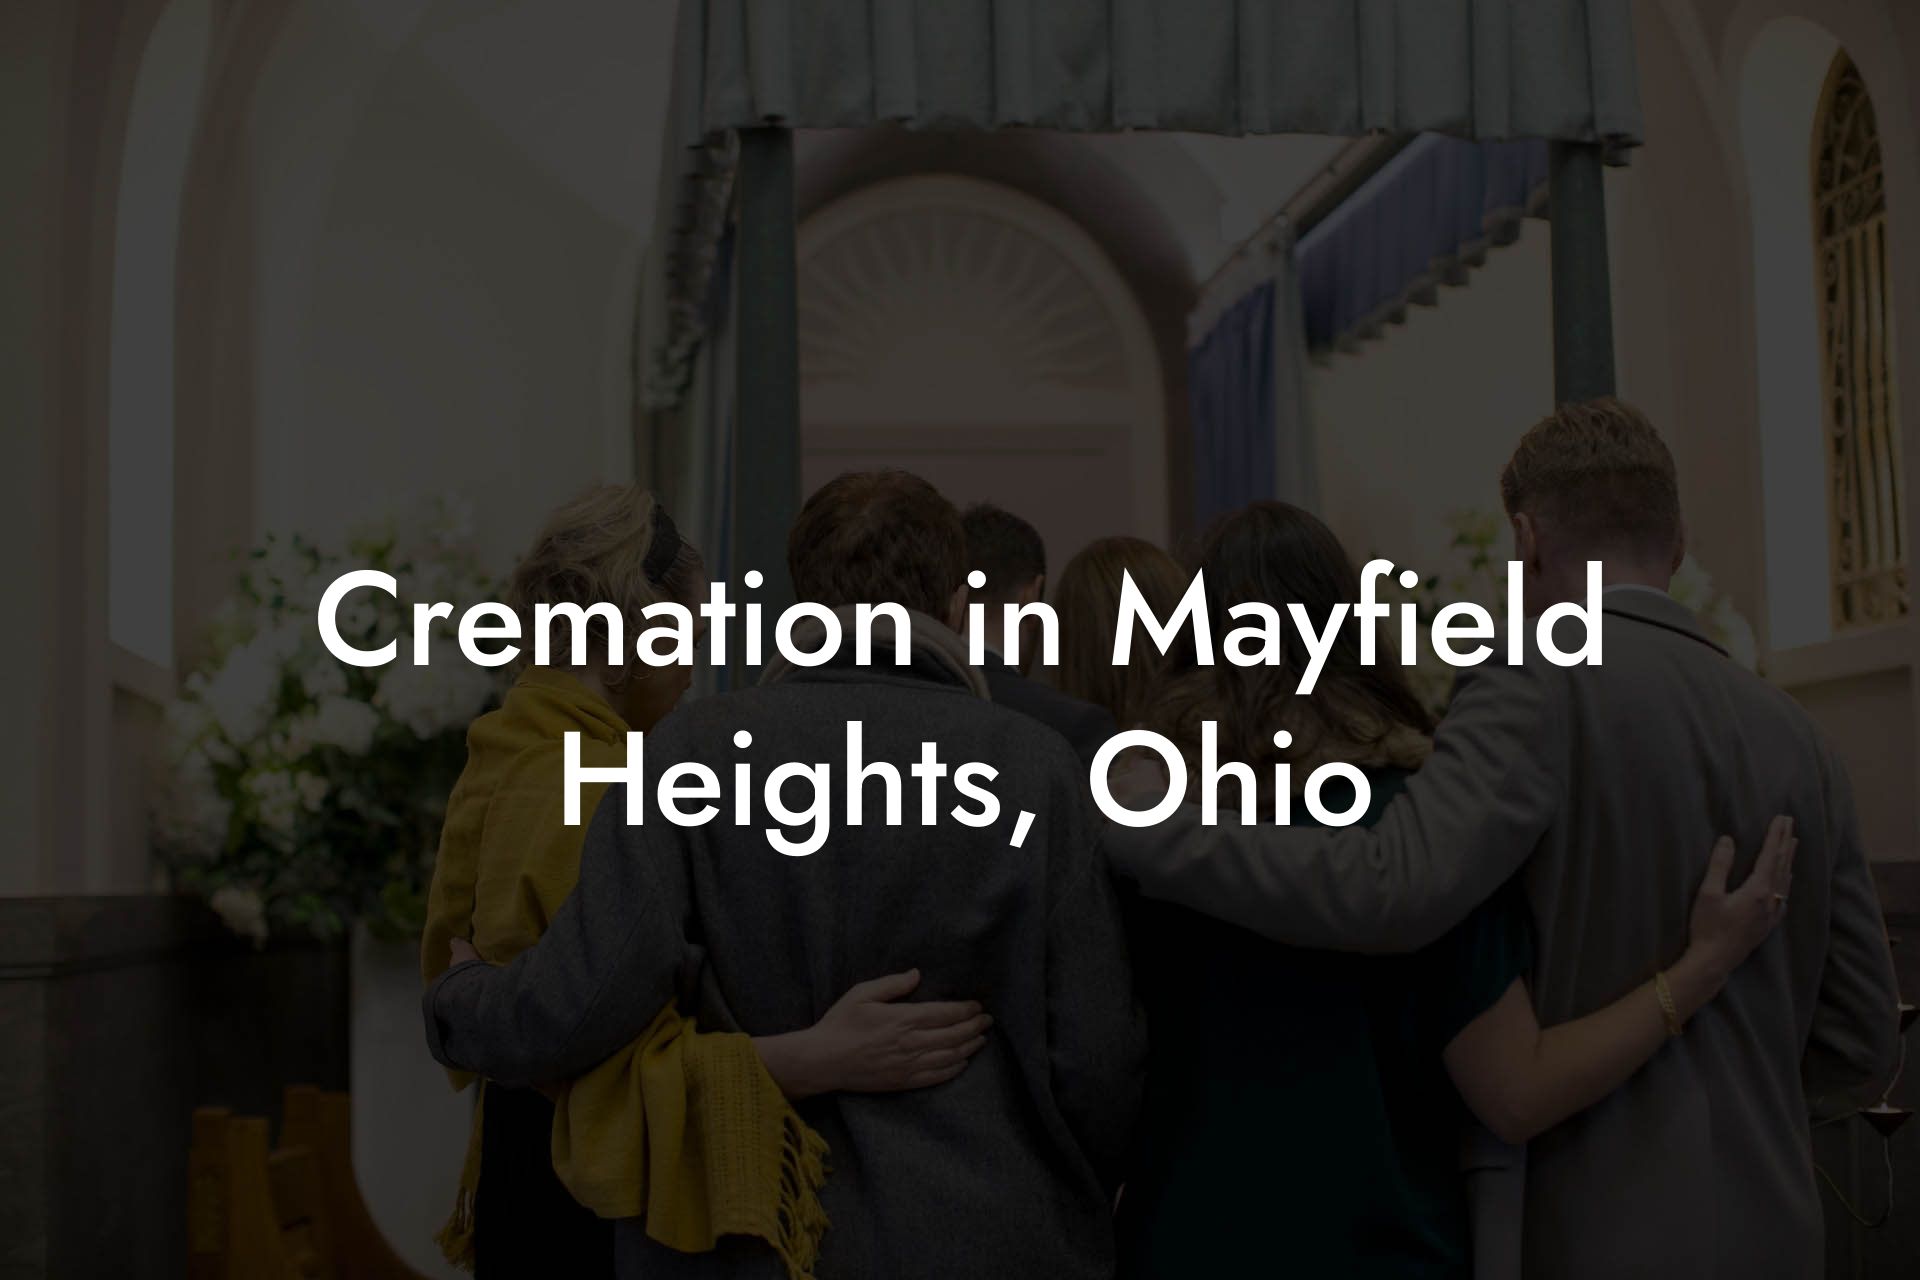 Cremation in Mayfield Heights, Ohio